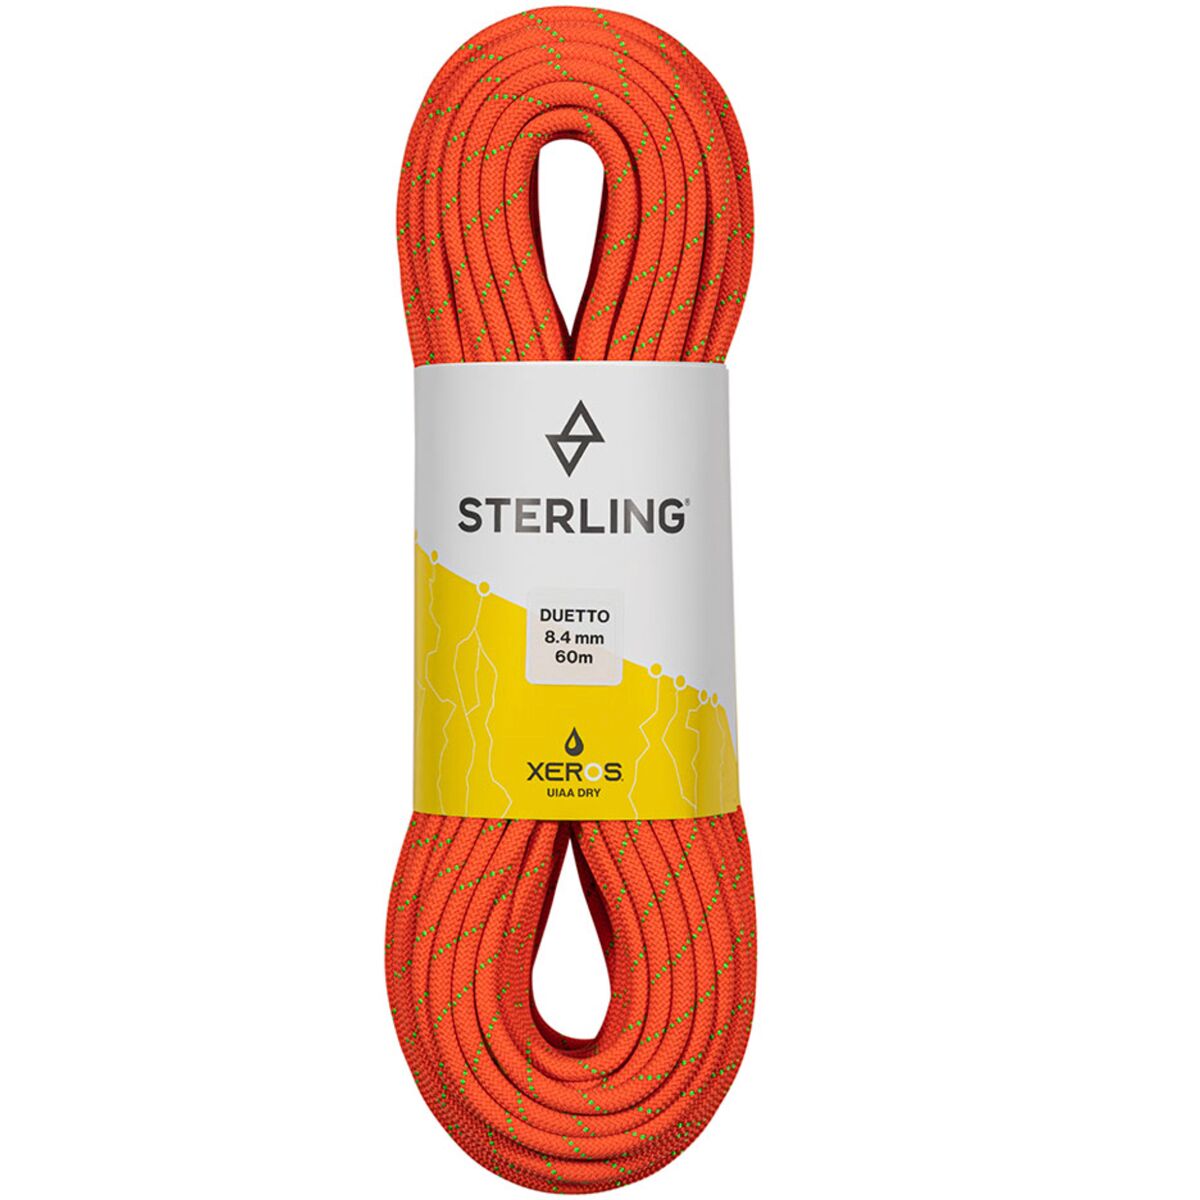 Sterling Duetto 8.4 XEROS Rope